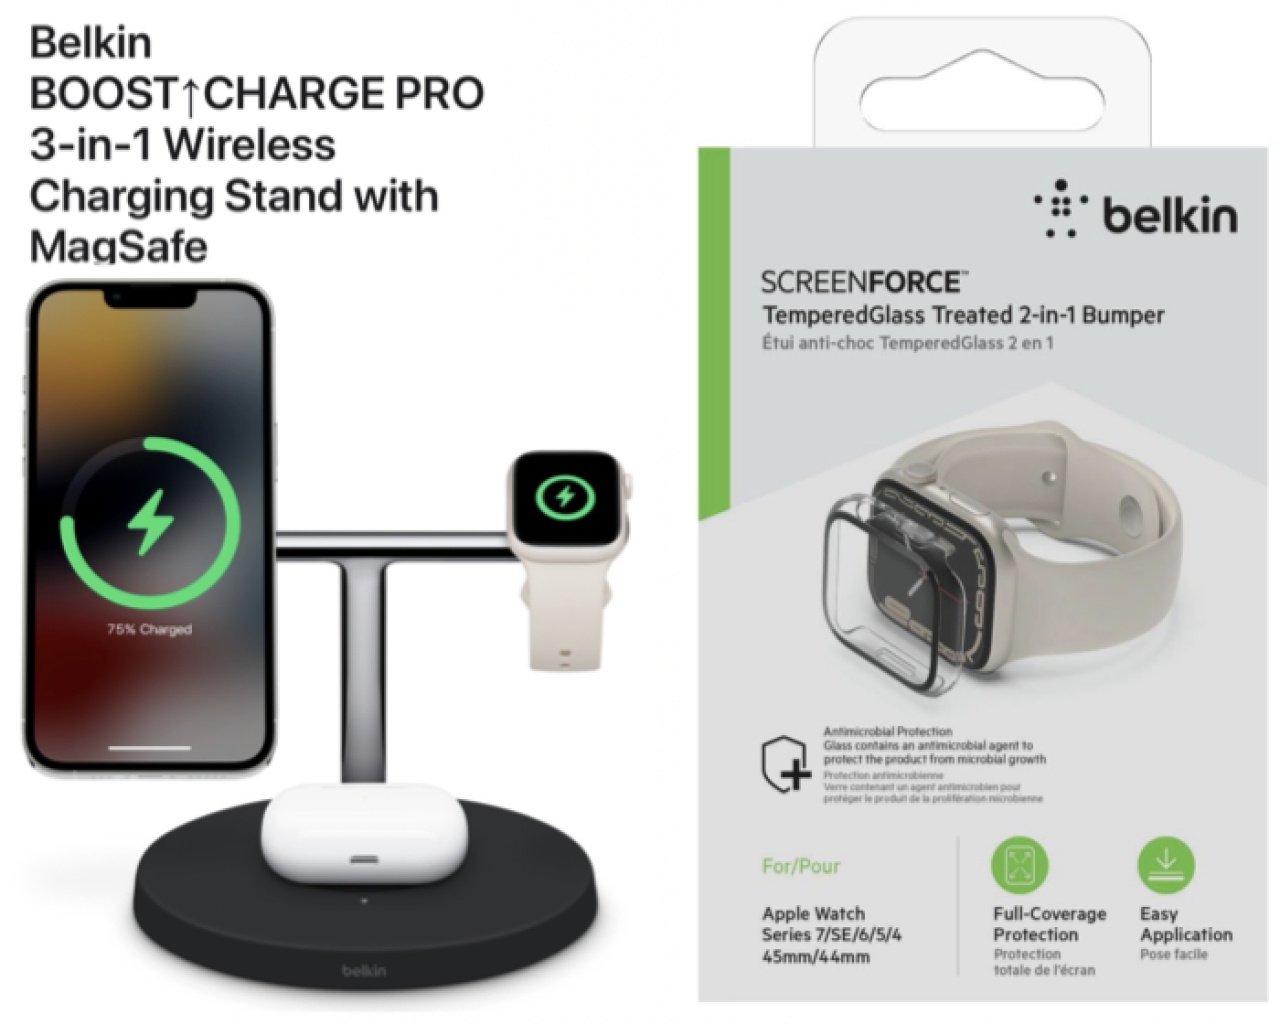 Perfect Belkin BOOST “CHARGE PRO” 3-in-1 Wireless Charger MagSafe